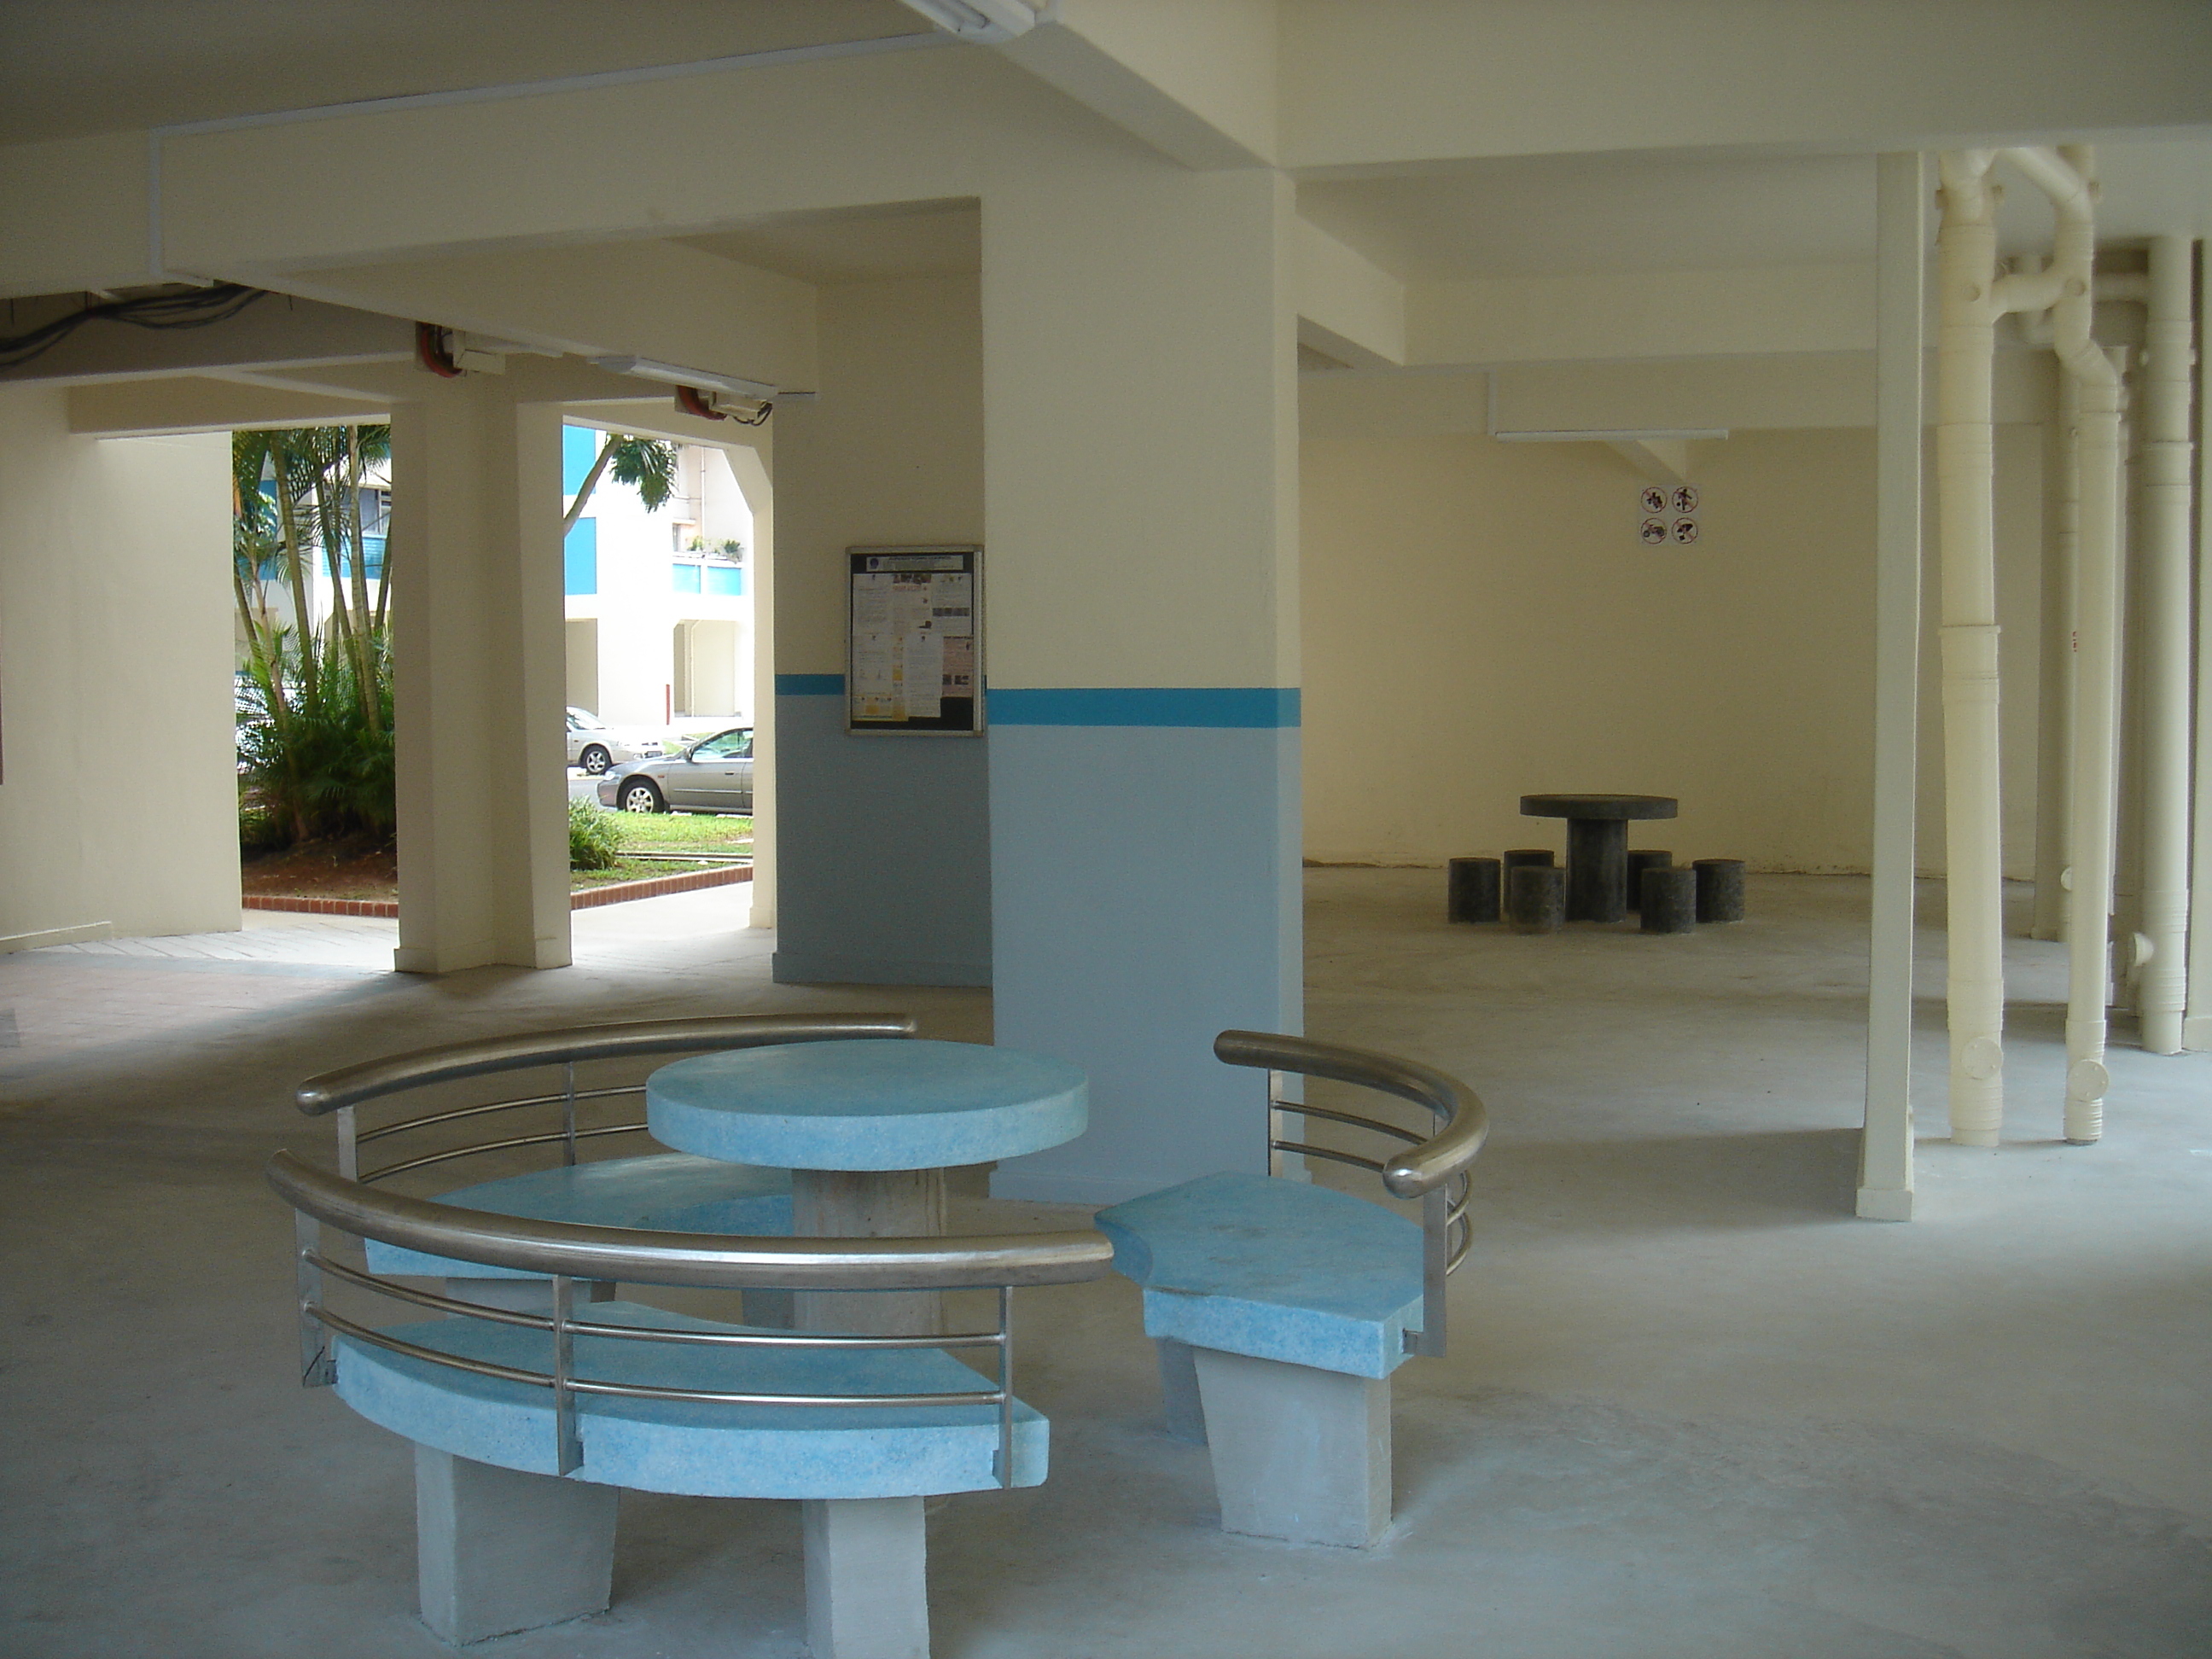 File Void Deck On The Ground Floor Of A Housing And Development